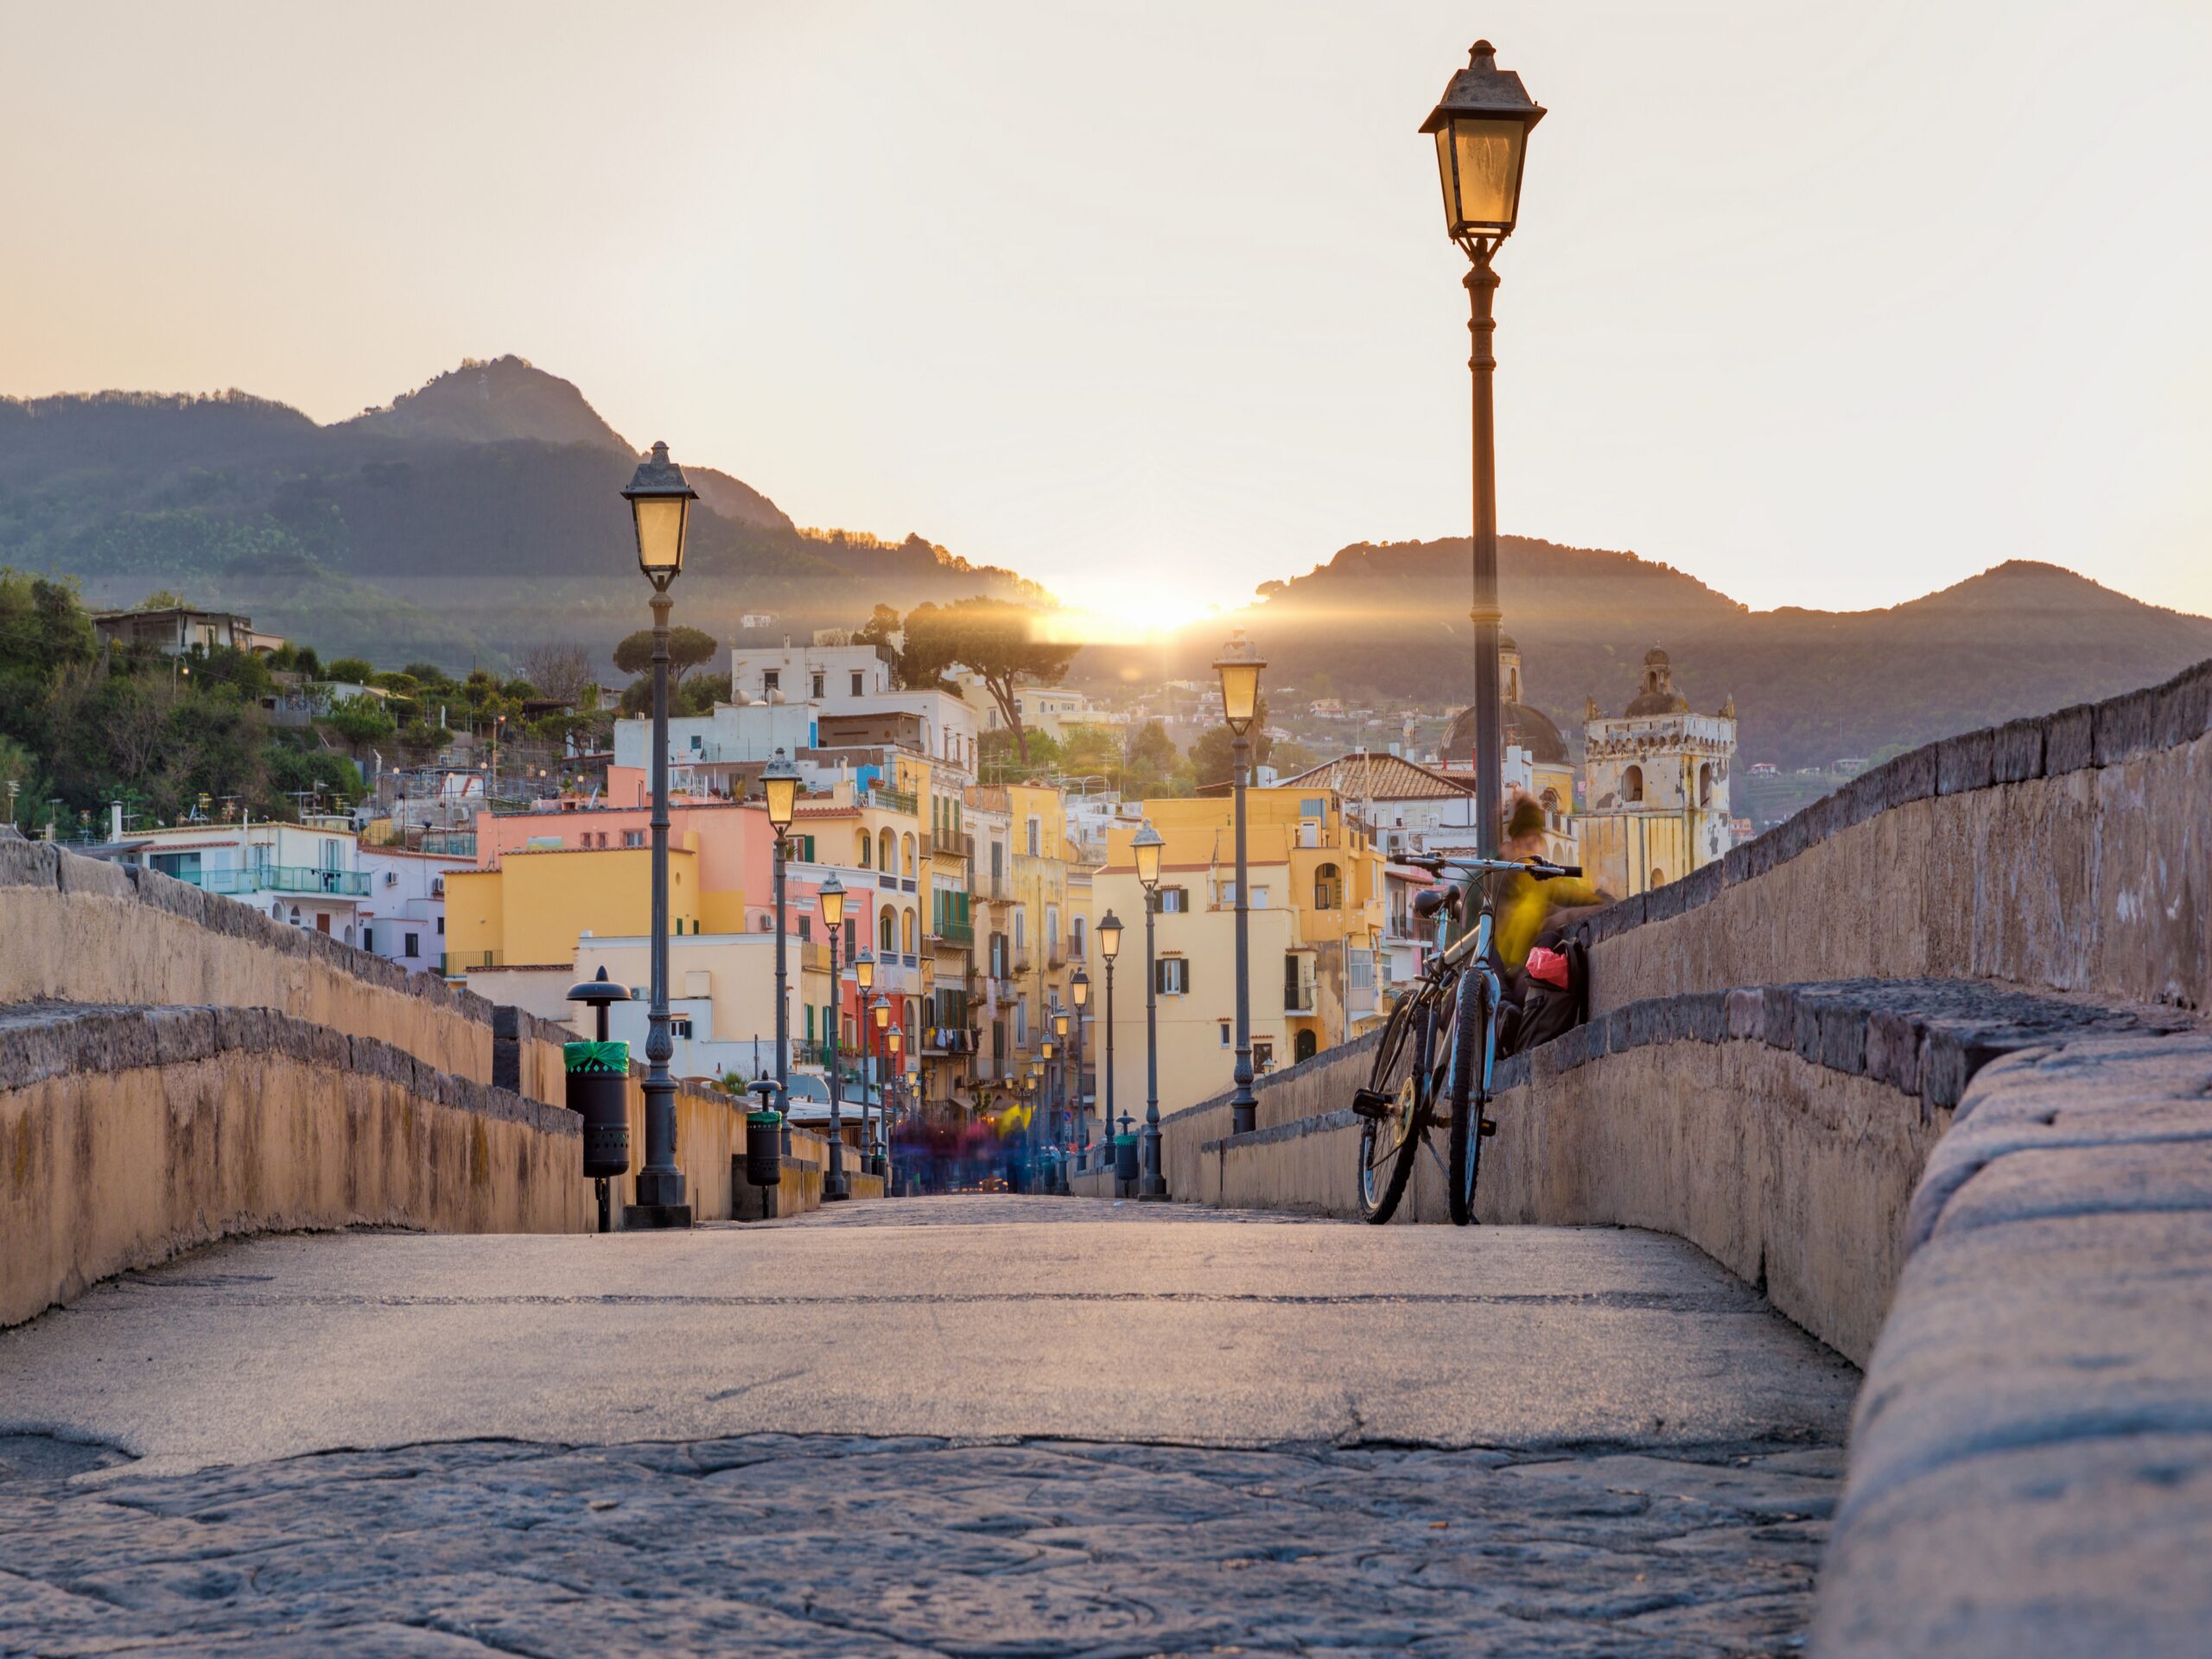 Sunset view from side of Aragonese Castle on Ischia street with colourful houses, Ischia Island, Italy. People blurred due to very long exposure time.